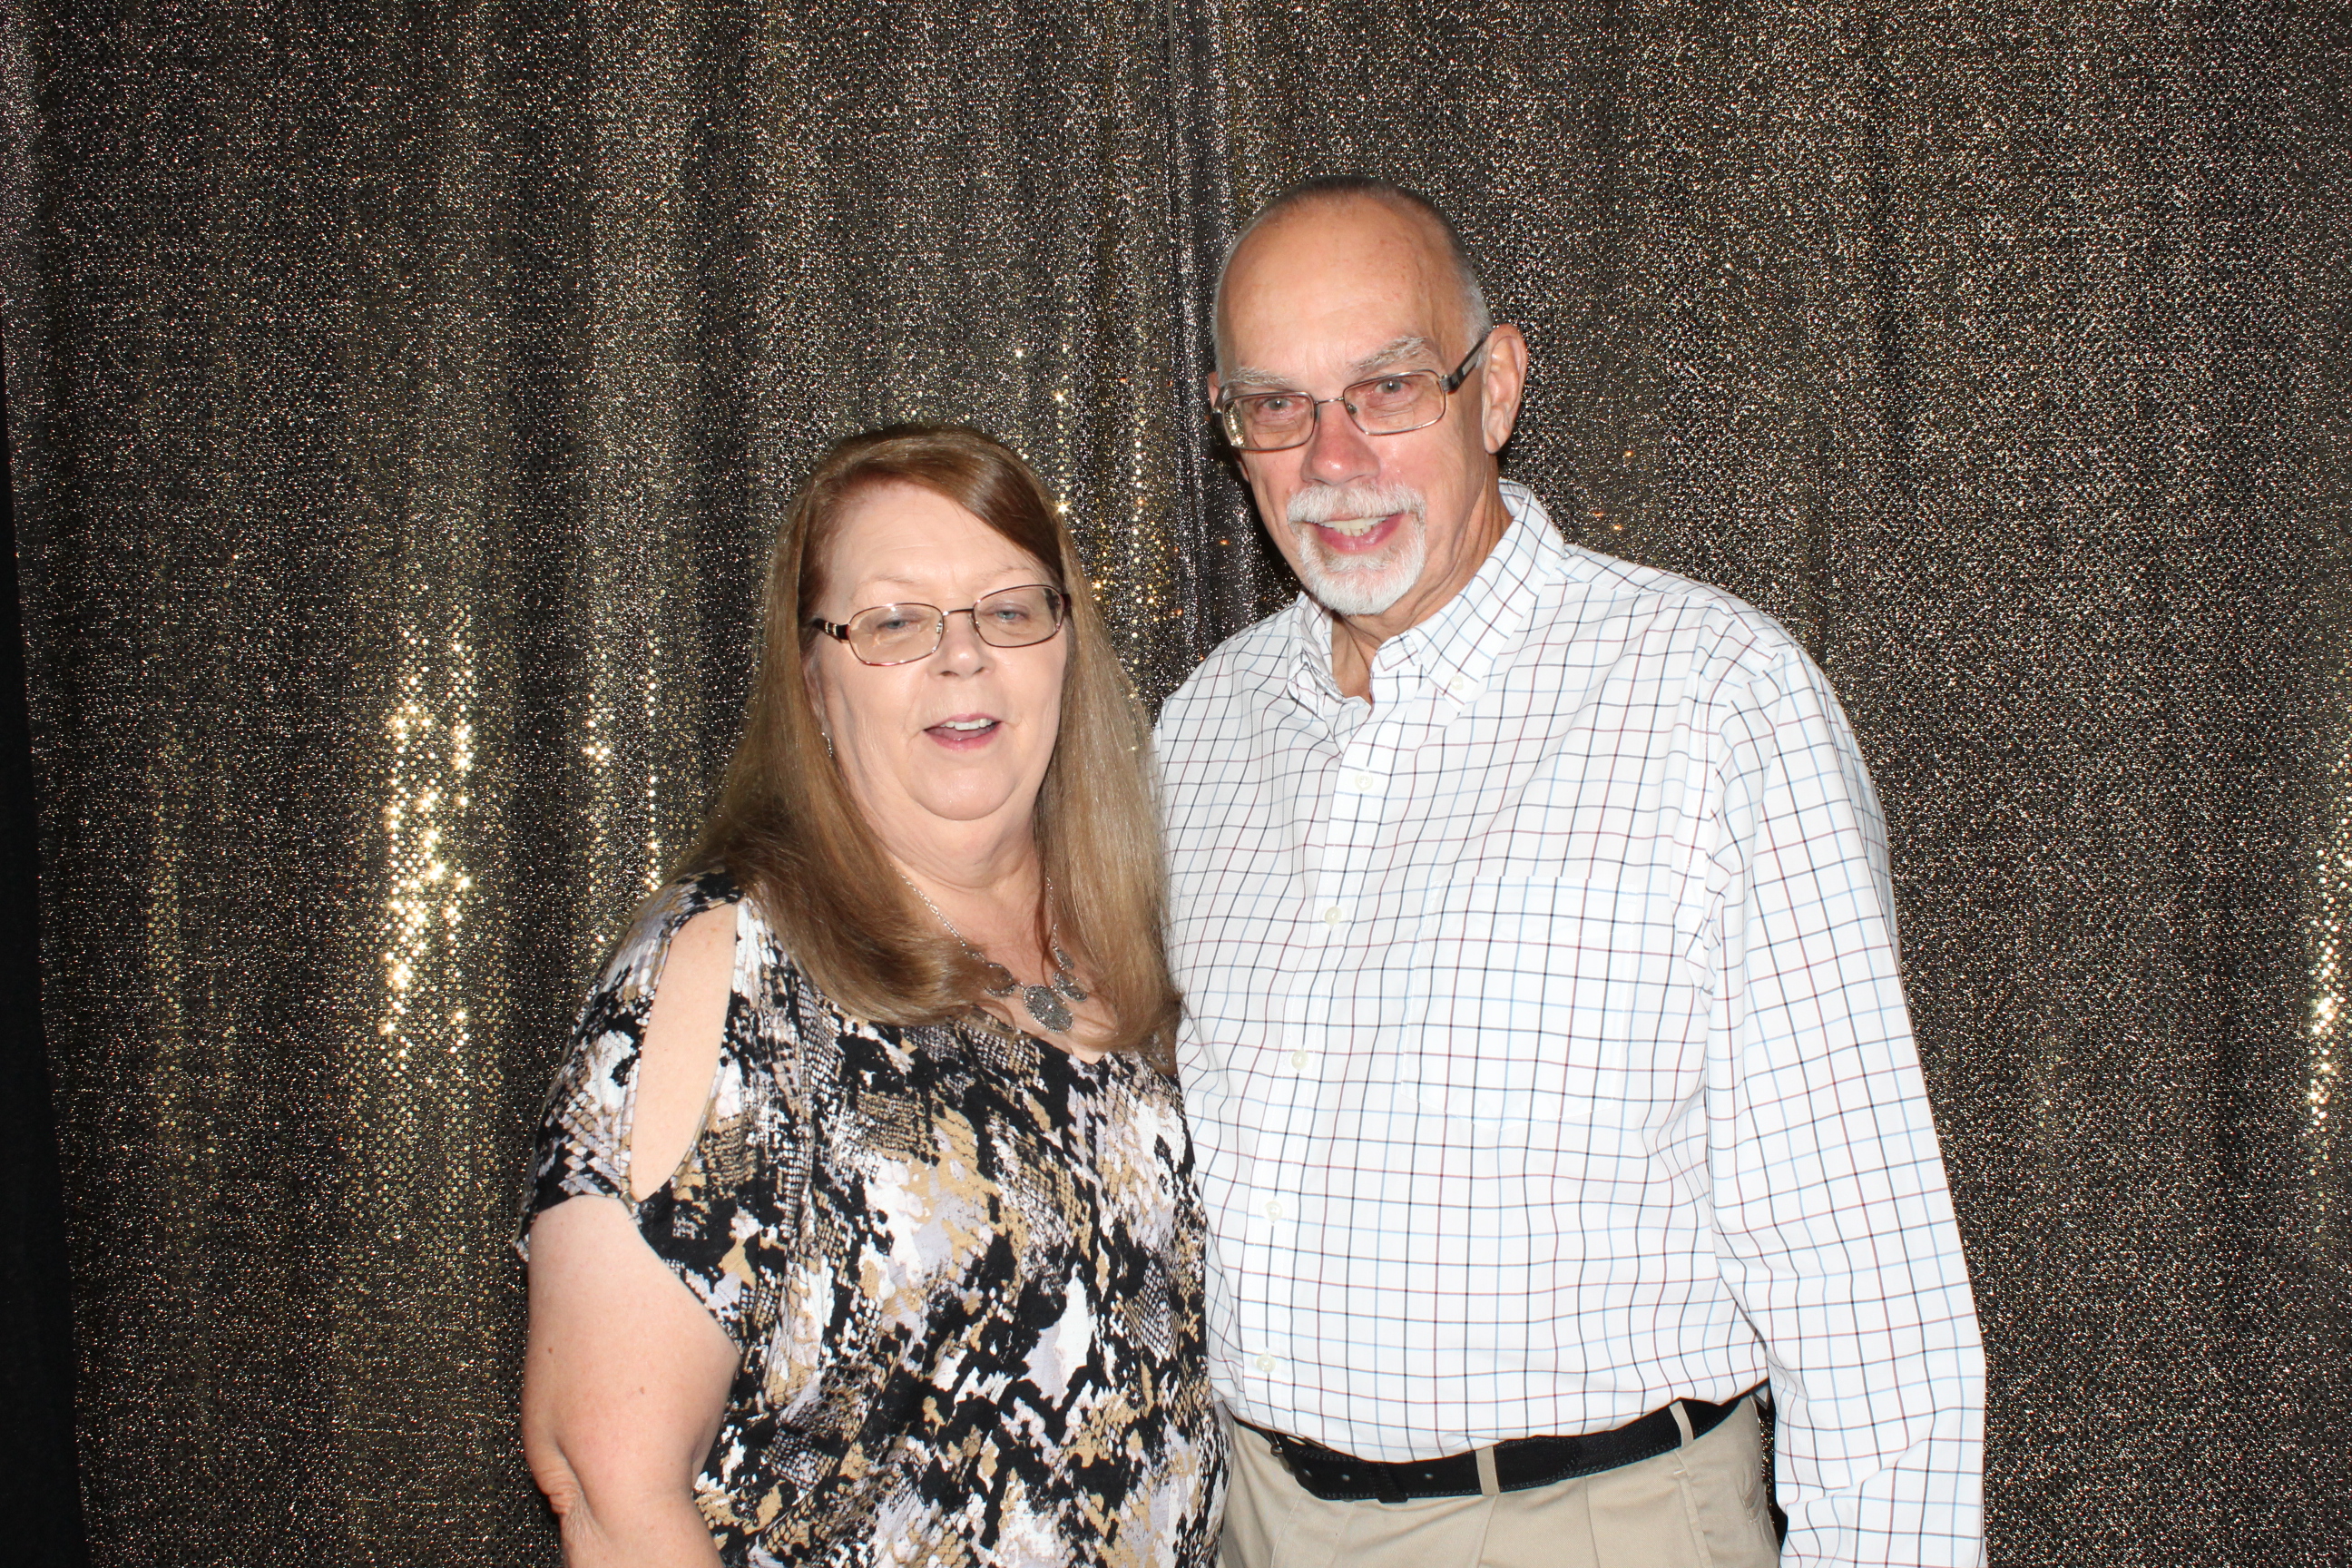 PHOTO BOOTH: Kathy and Dale Miller